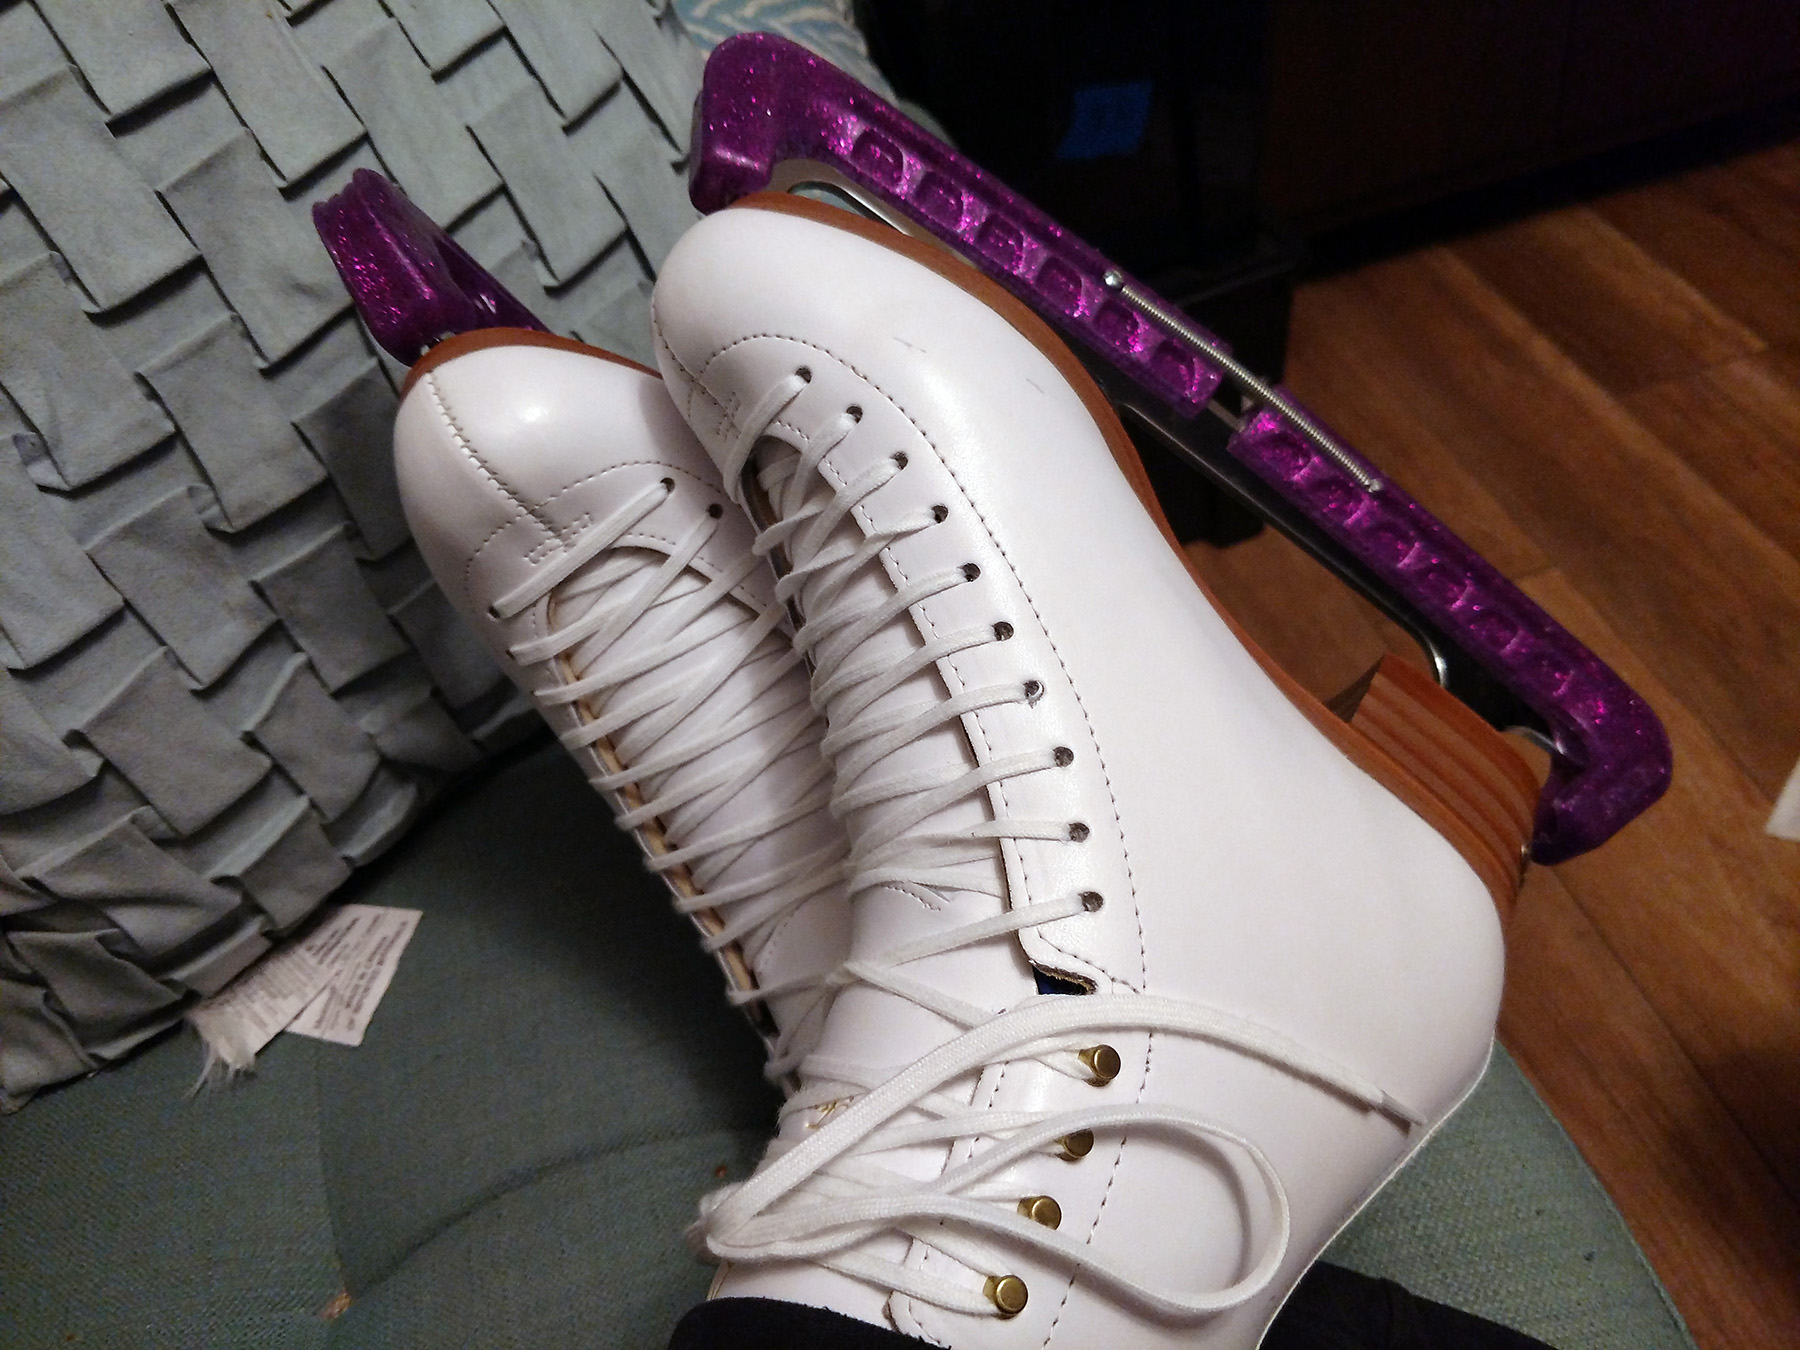 White figure skates on feet, with purple glittery blade guards.